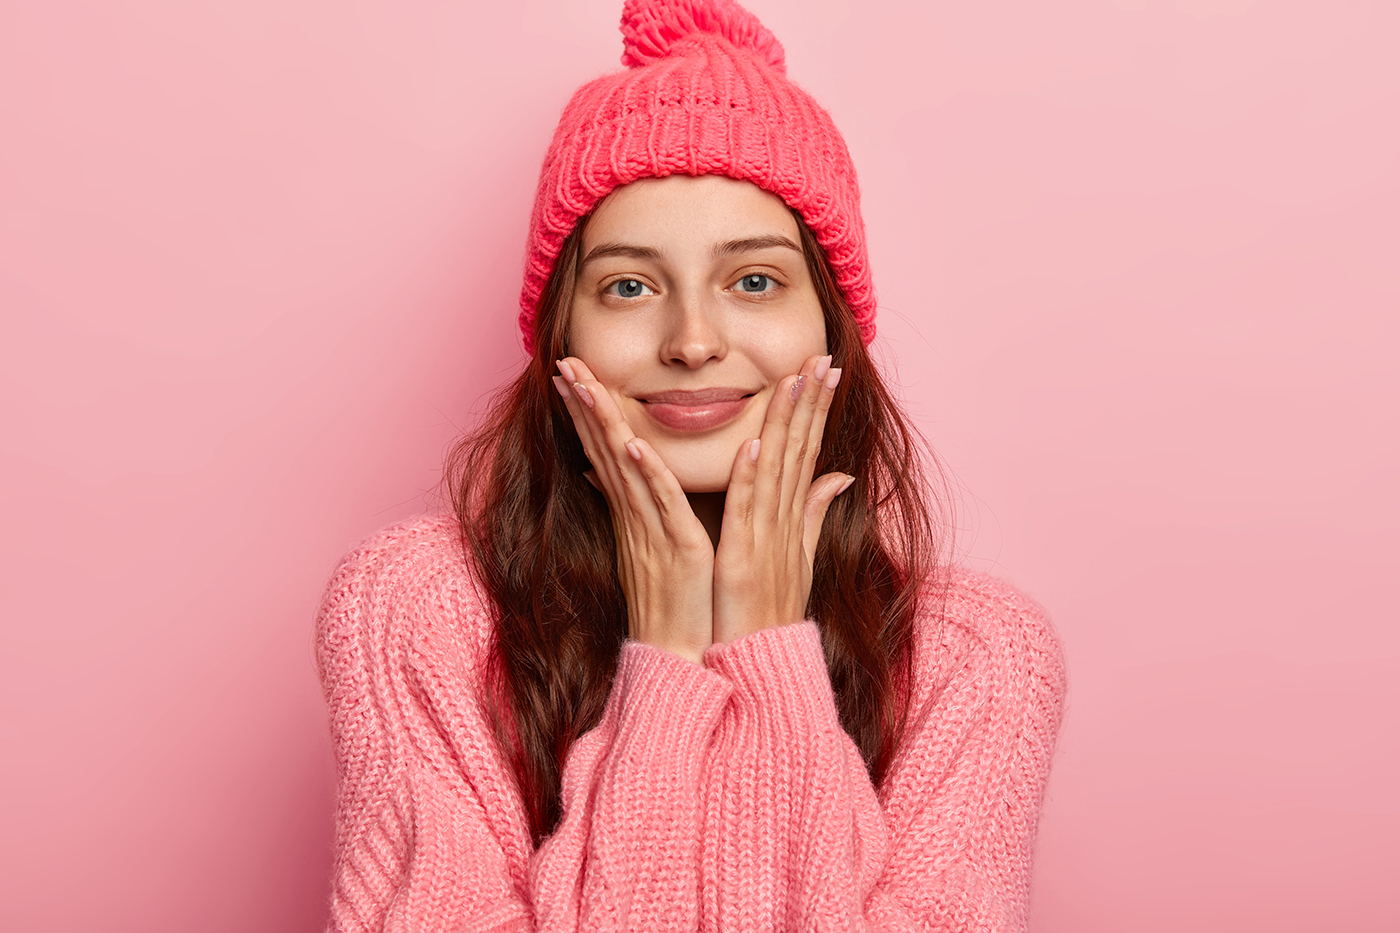 Easy home remedies to say goodbye to dry winter skin.